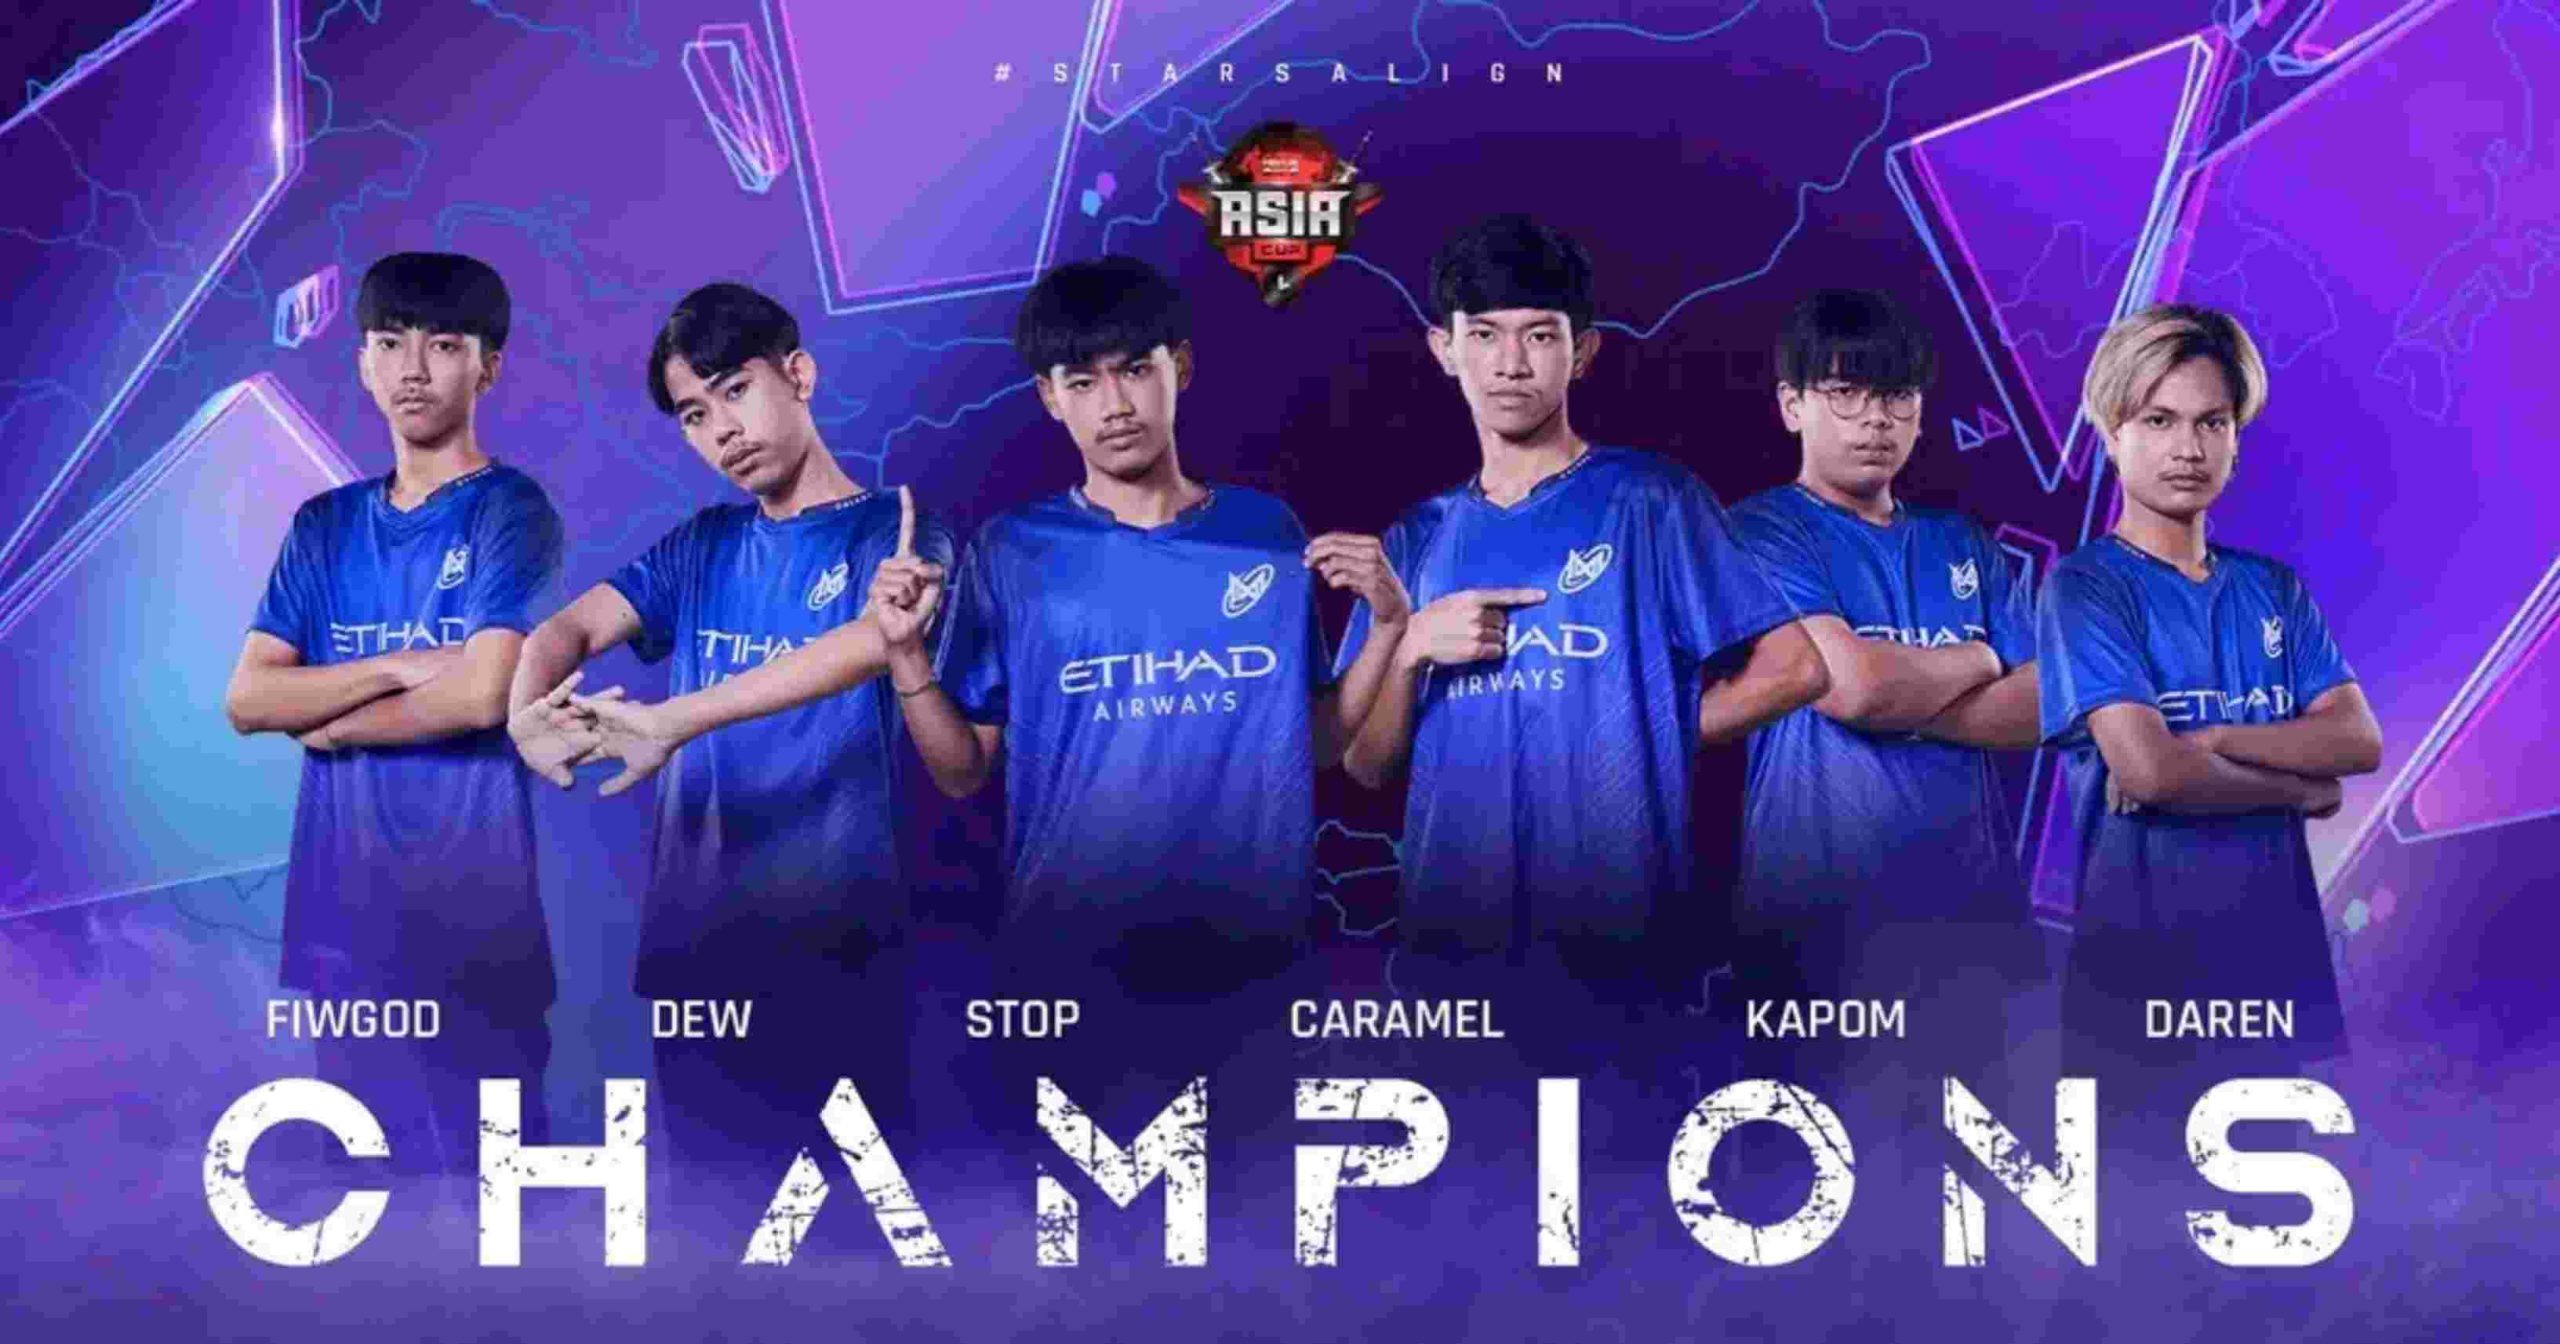 Nigma Galaxy Thailand is the champion of Lidoma Asia Cup